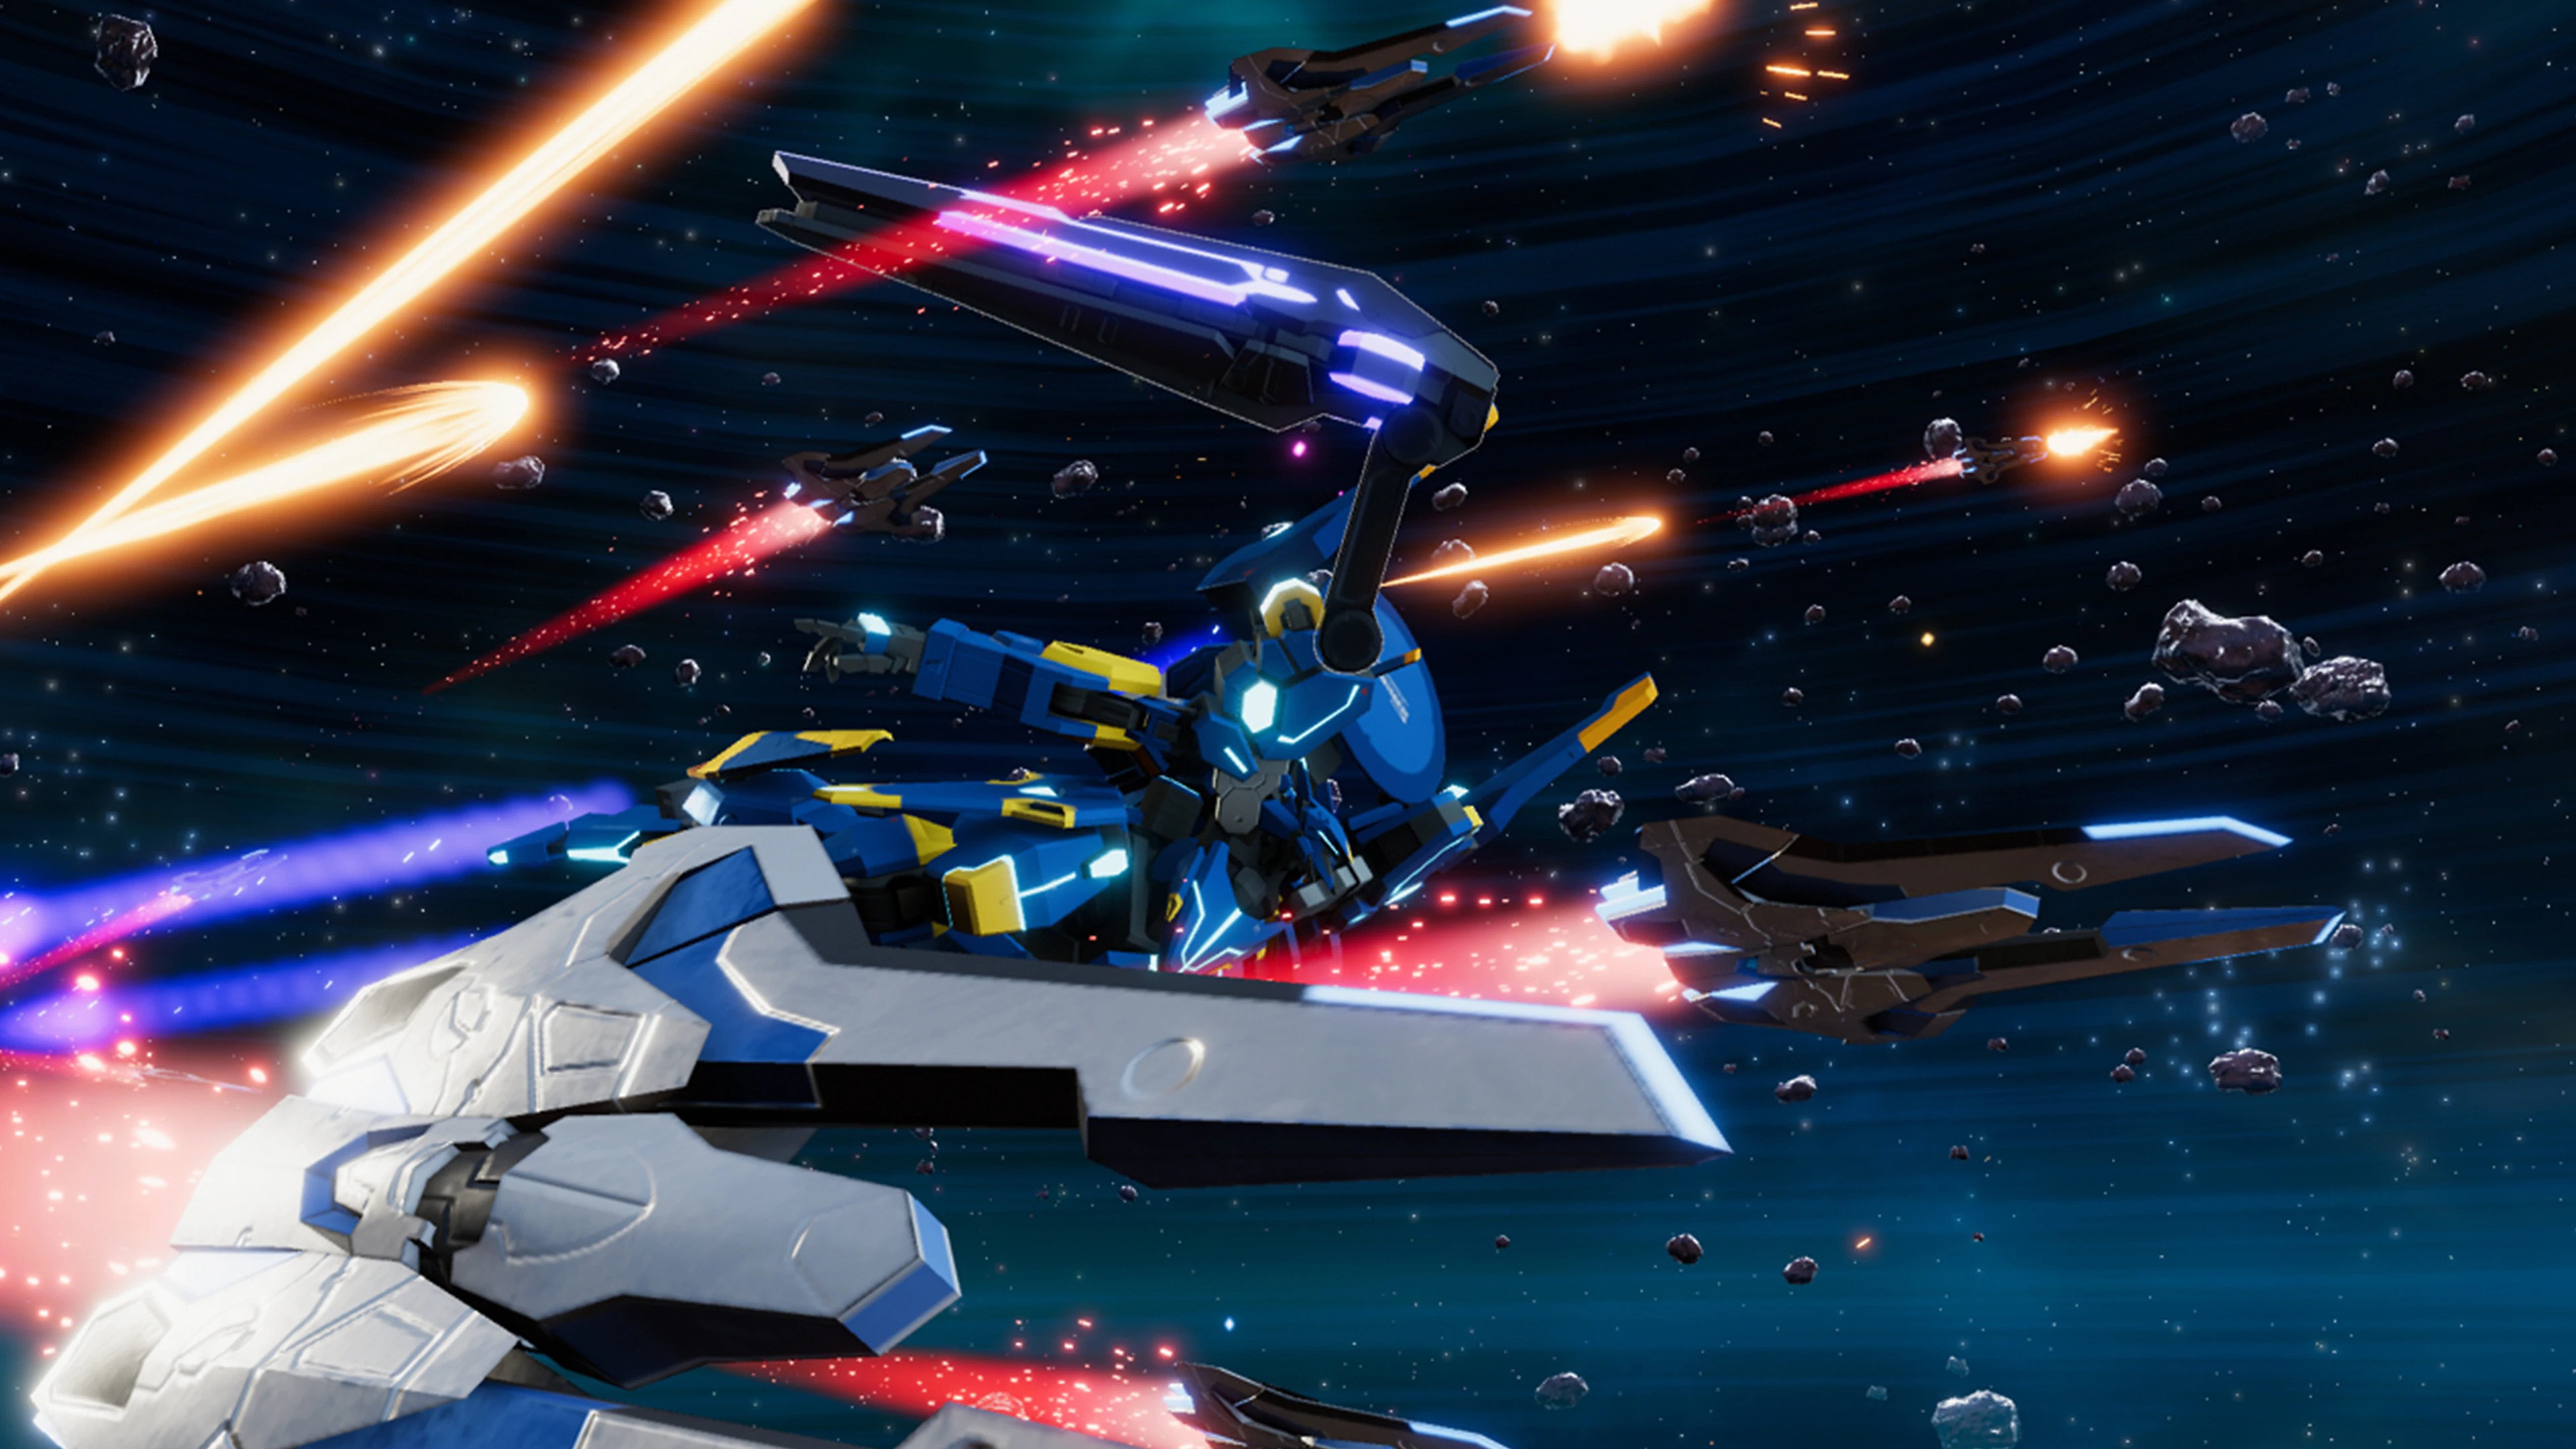 Relayer screenshot showing a mech suit flying through space alongside several spaceships